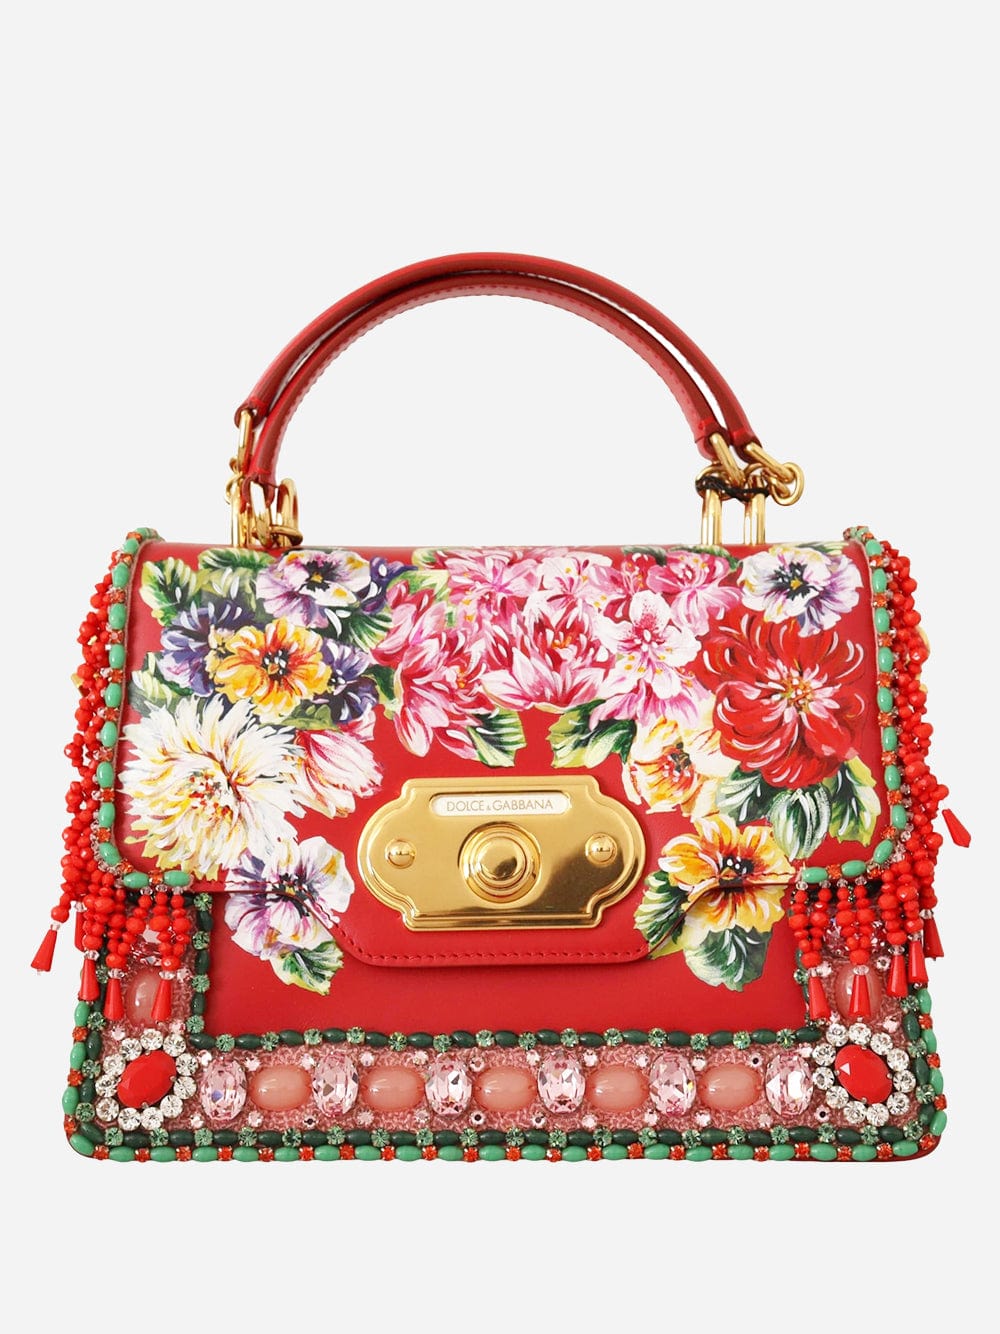 Dolce & Gabbana Welcome Floral Print Tote Bag